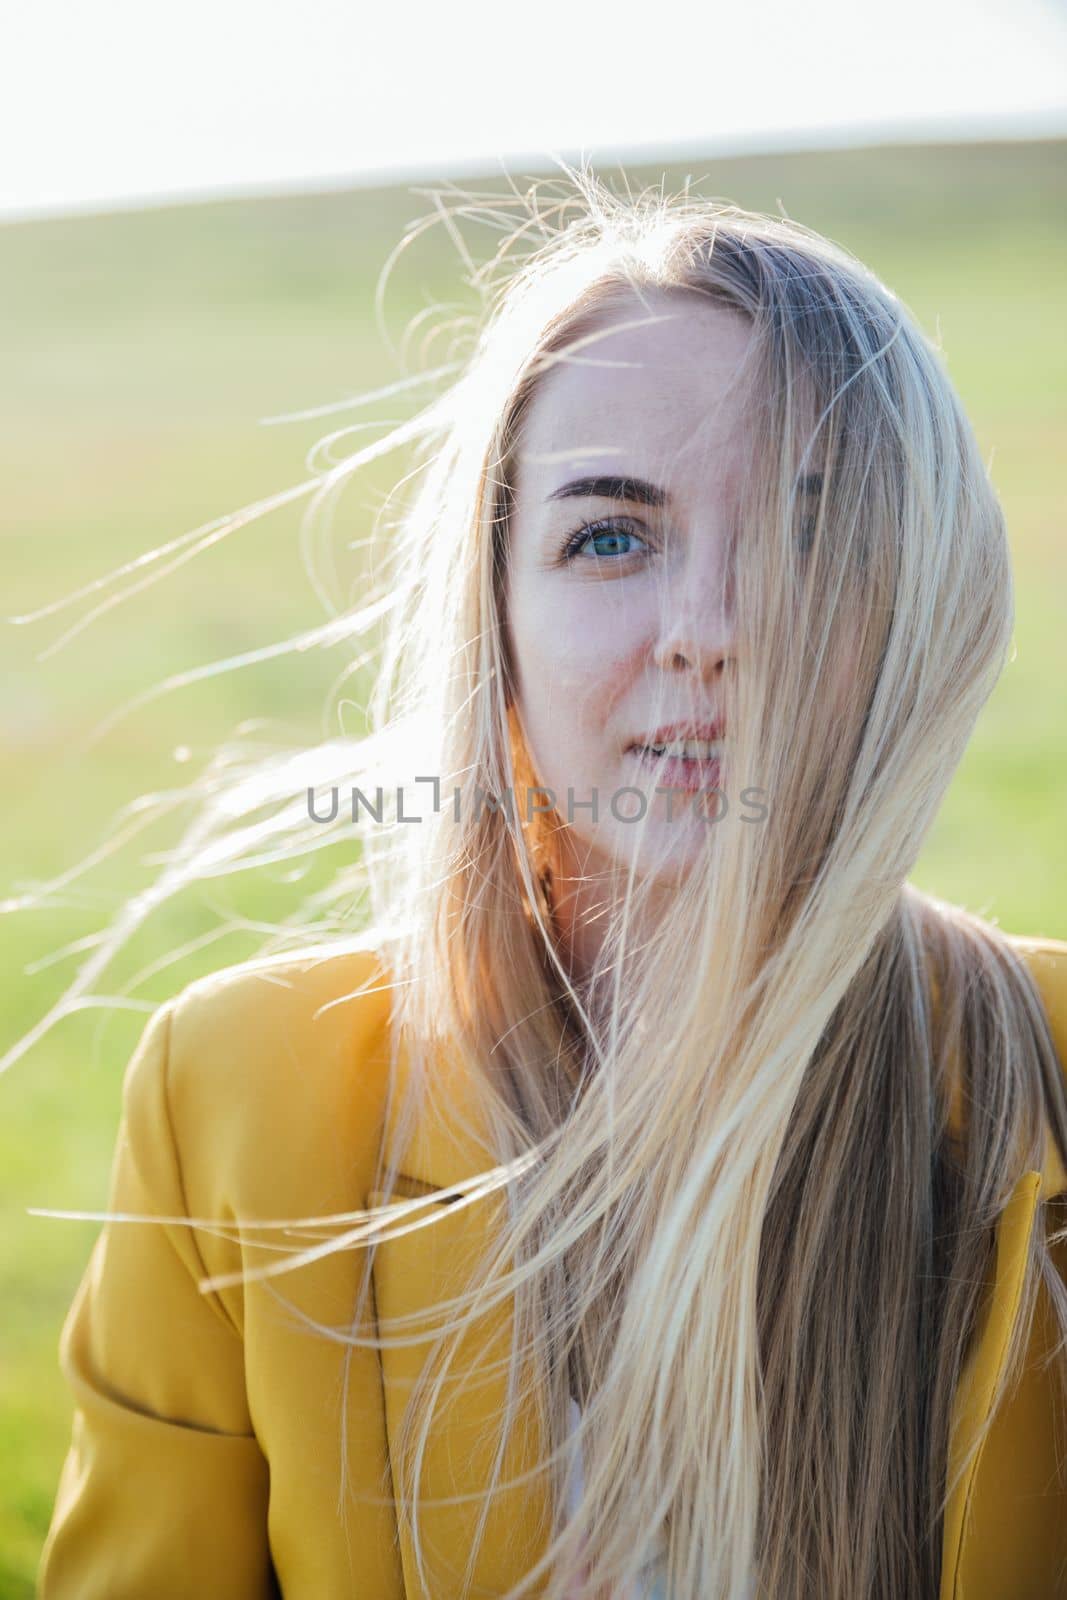 portrait of a beautiful blonde girl in a yellow jacket by Simakov